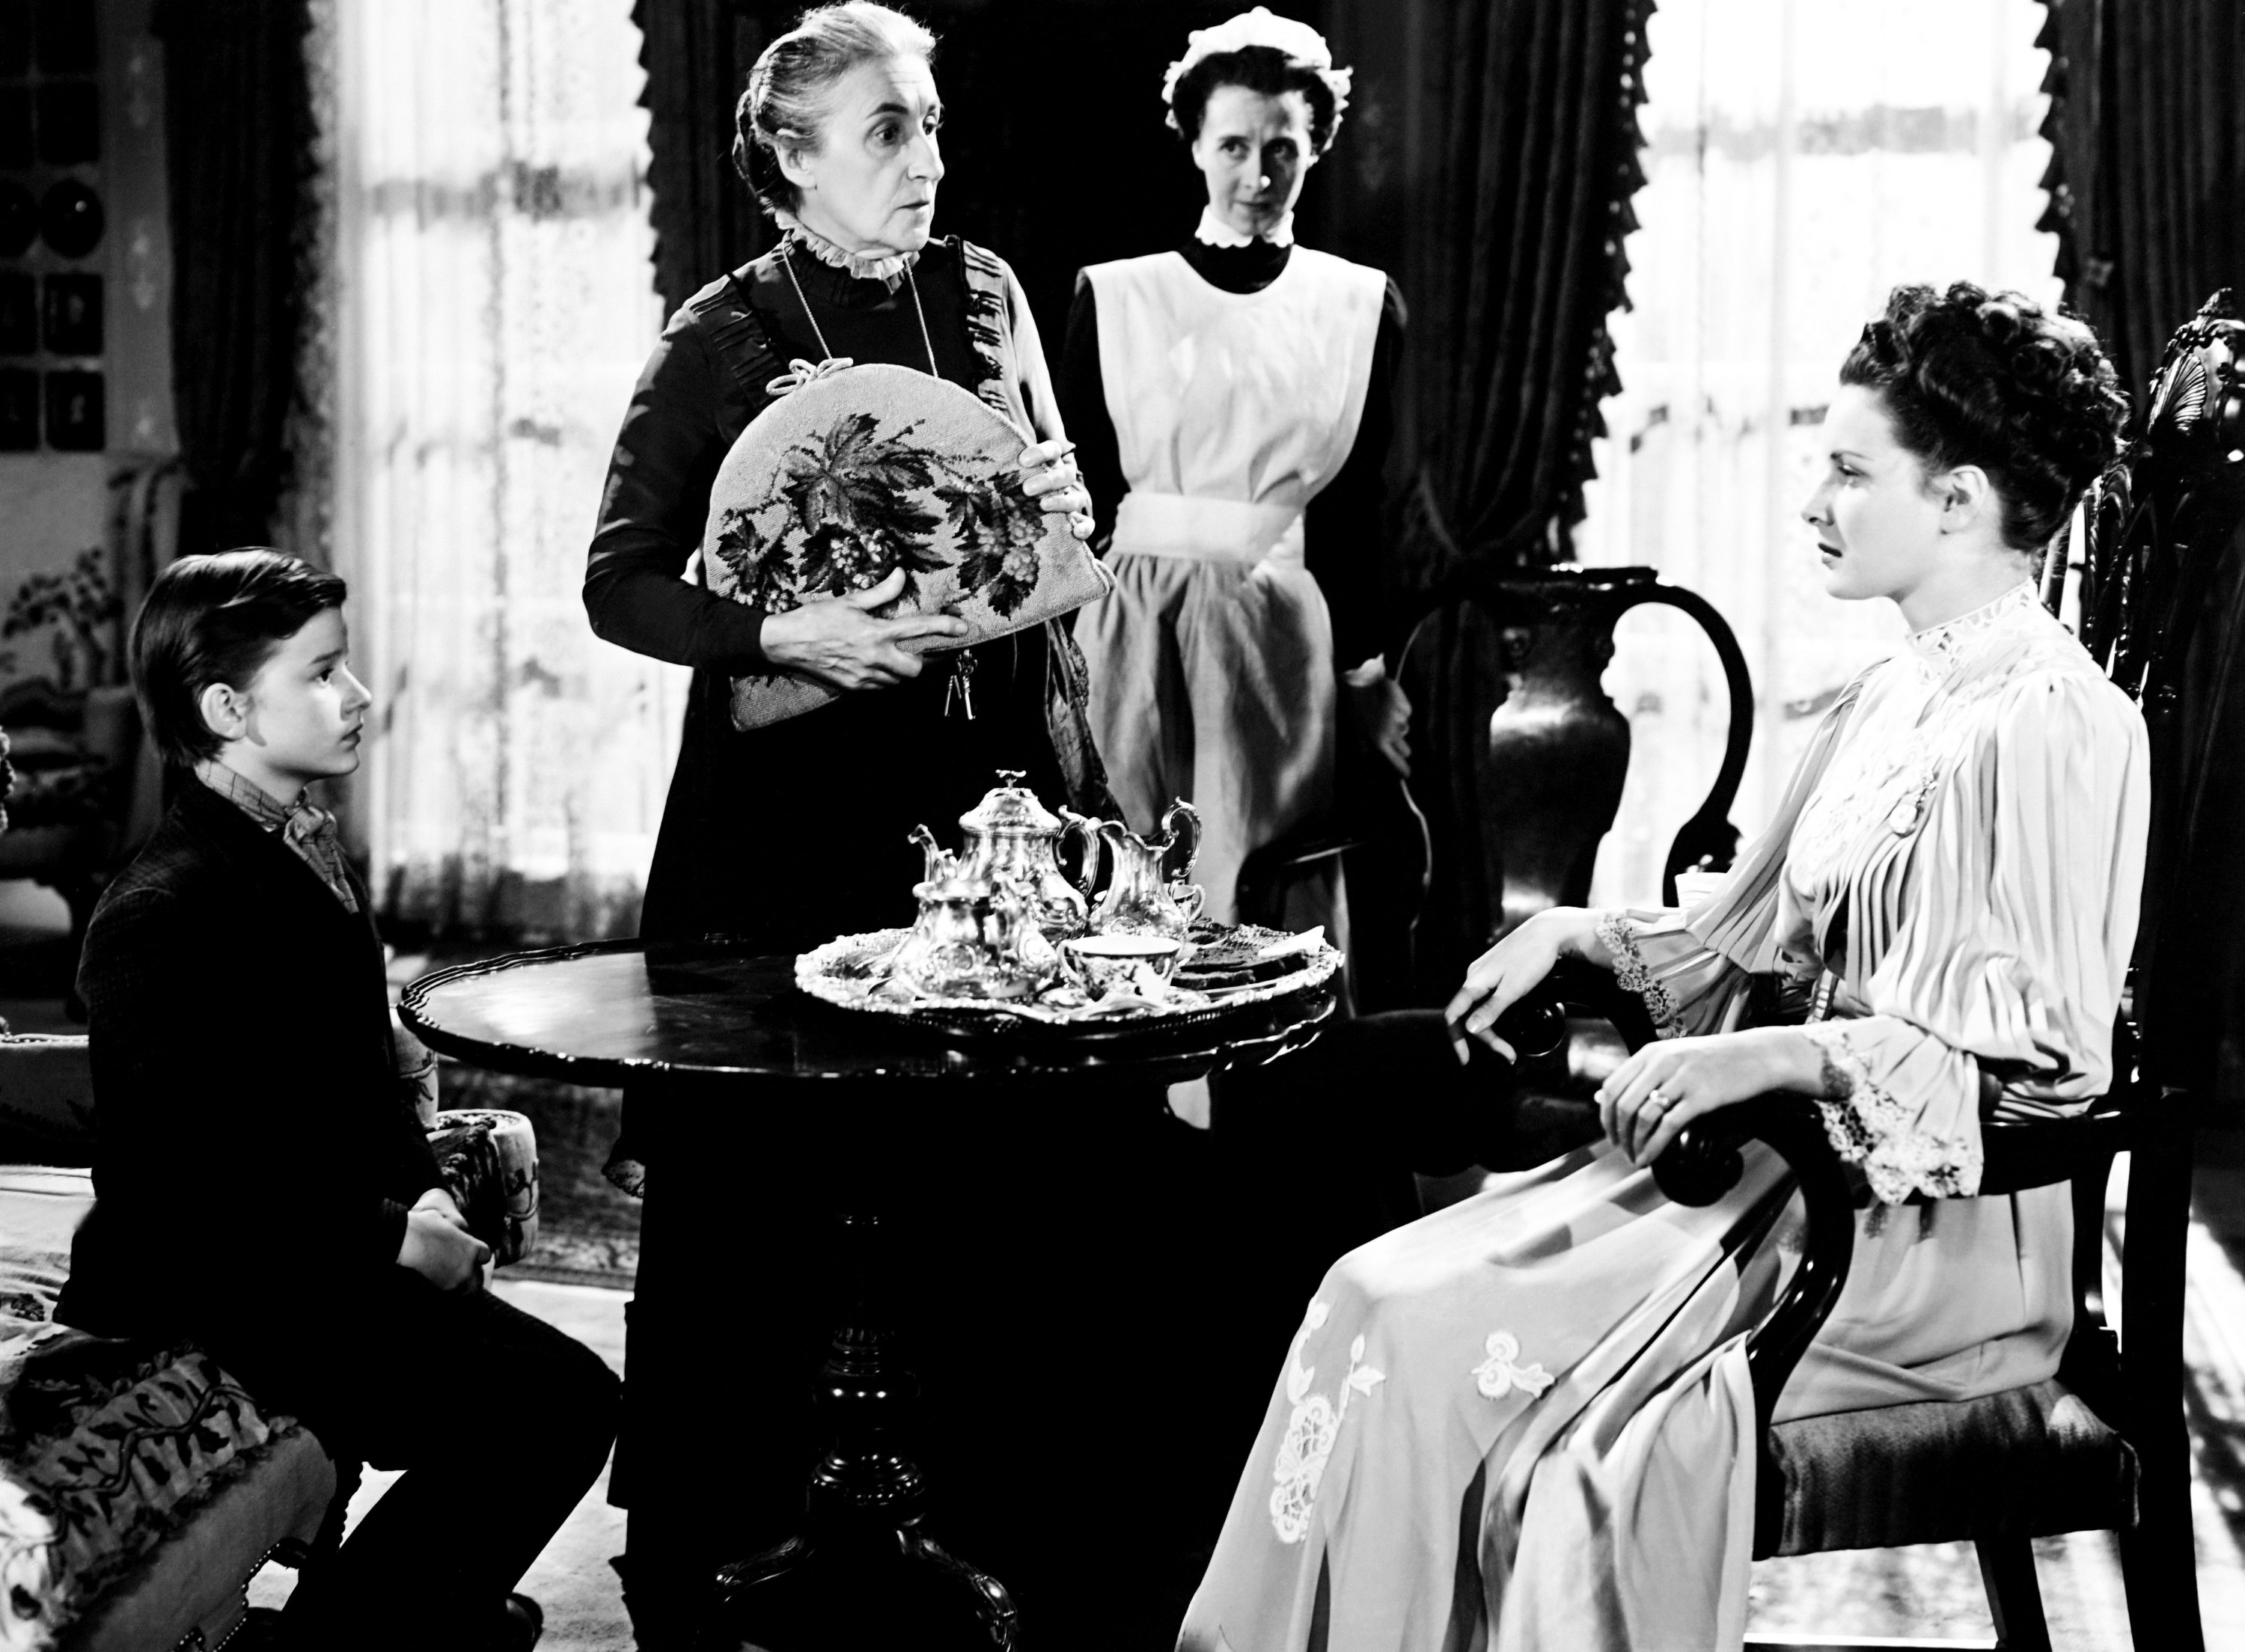 Vintage film scene with four actors in period clothing, indoors, with one seated, a boy listening, and two women standing, one holding a fan and one in a maid uniform